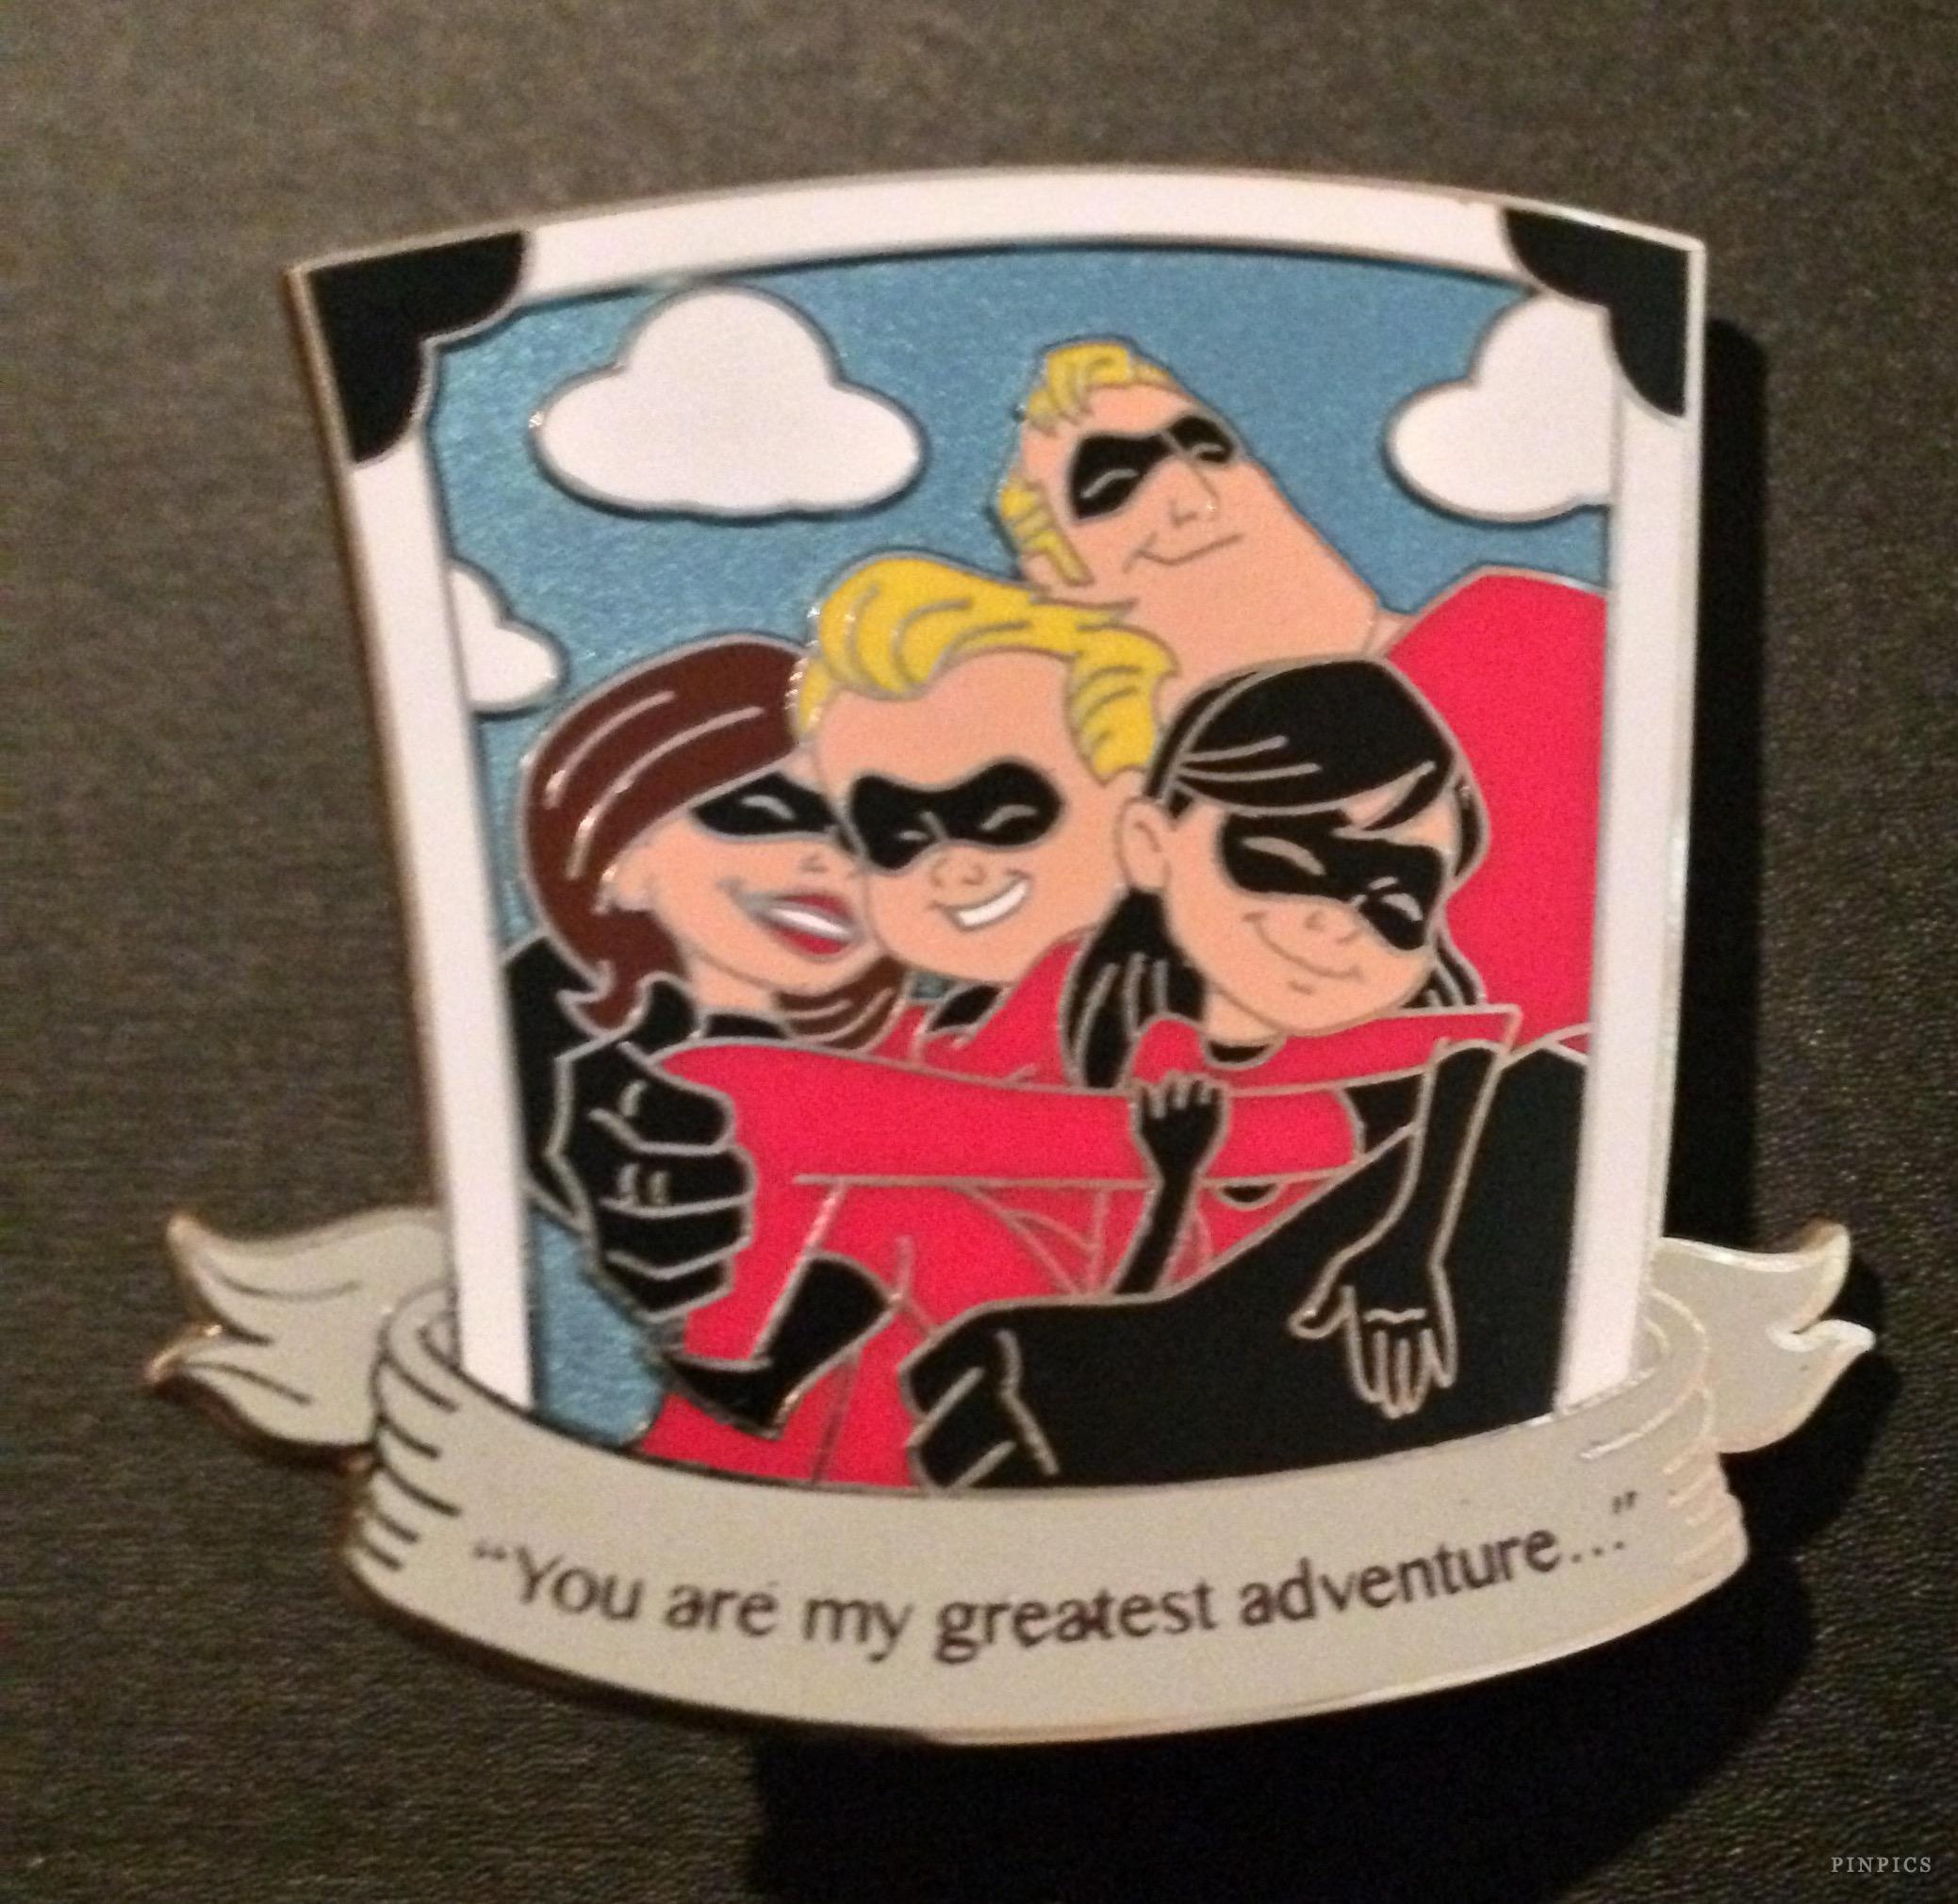 WDW – Love is an Adventure 2017 – Love is Quotable Box Set – The Incredibles